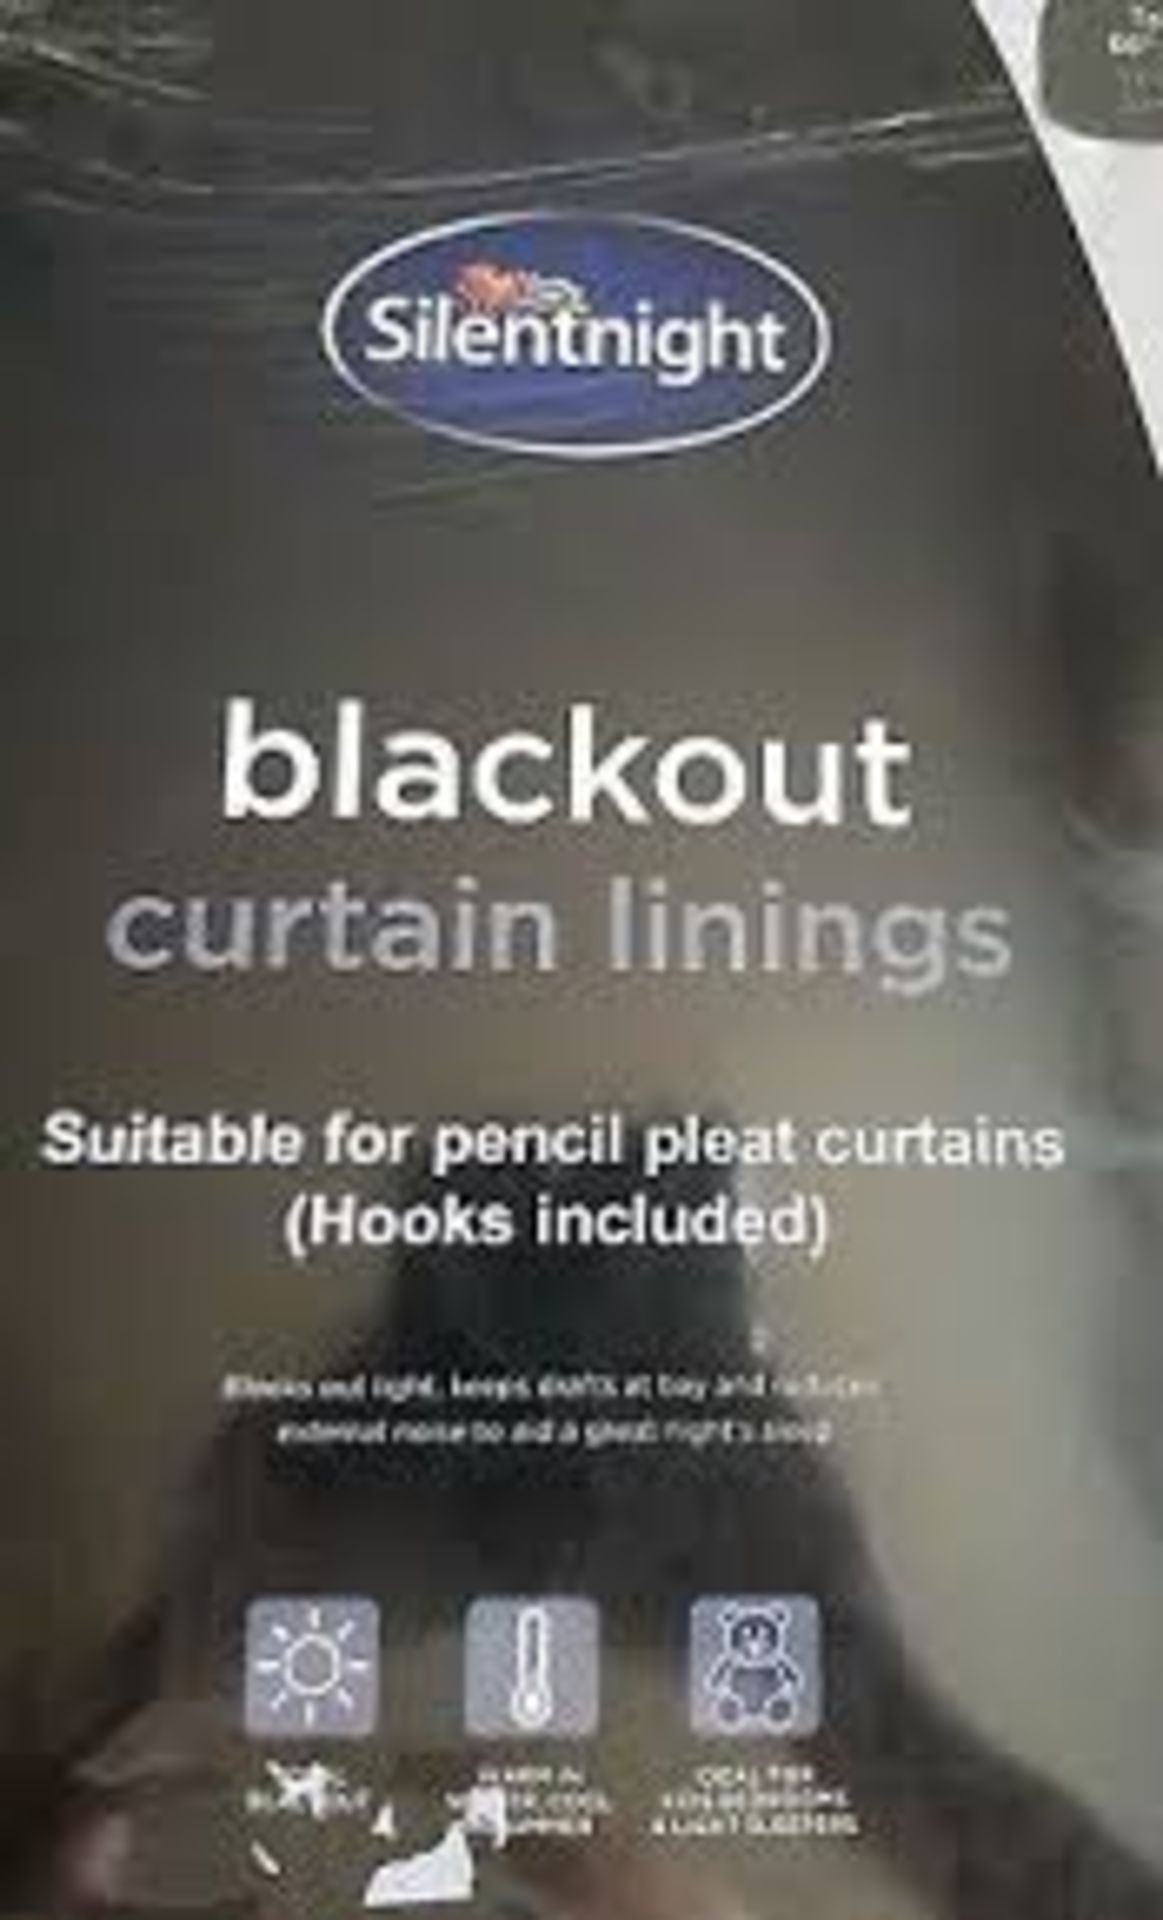 Brand New Pair Of 90x72 Inch Silentnight Curtain Linings RRP £130 (Pictures For Illustration